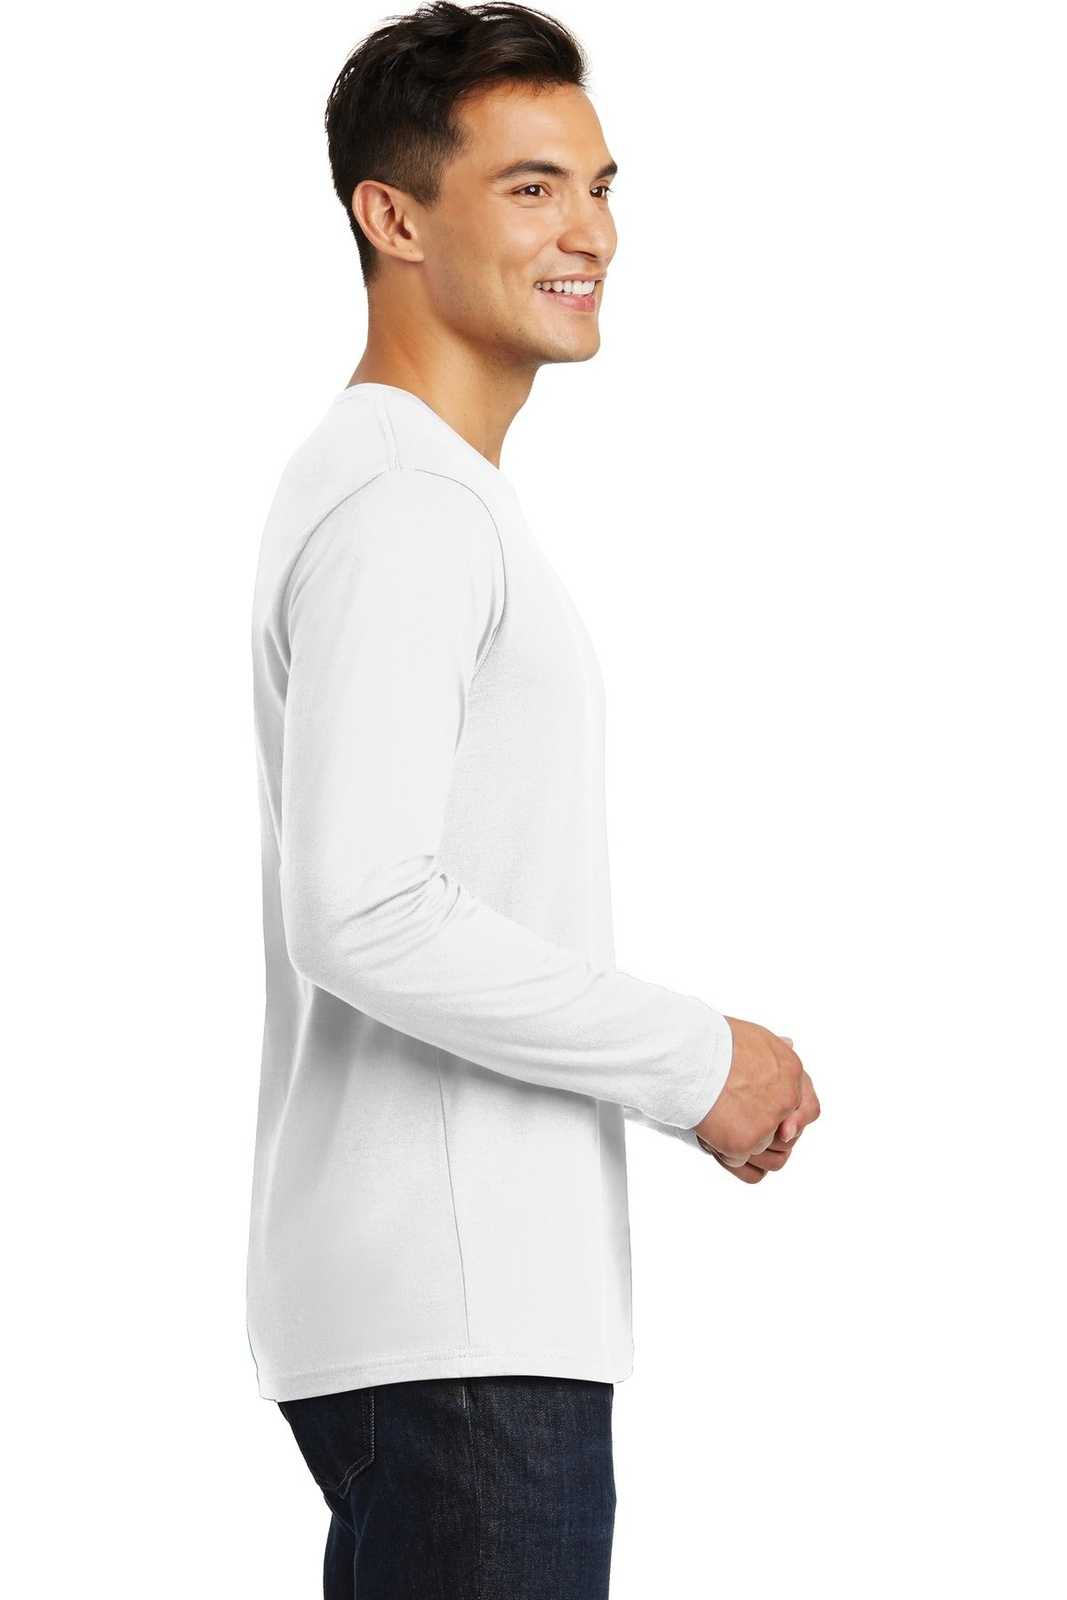 District DT105 Perfect Weight Long Sleeve Tee - Bright White - HIT a Double - 3